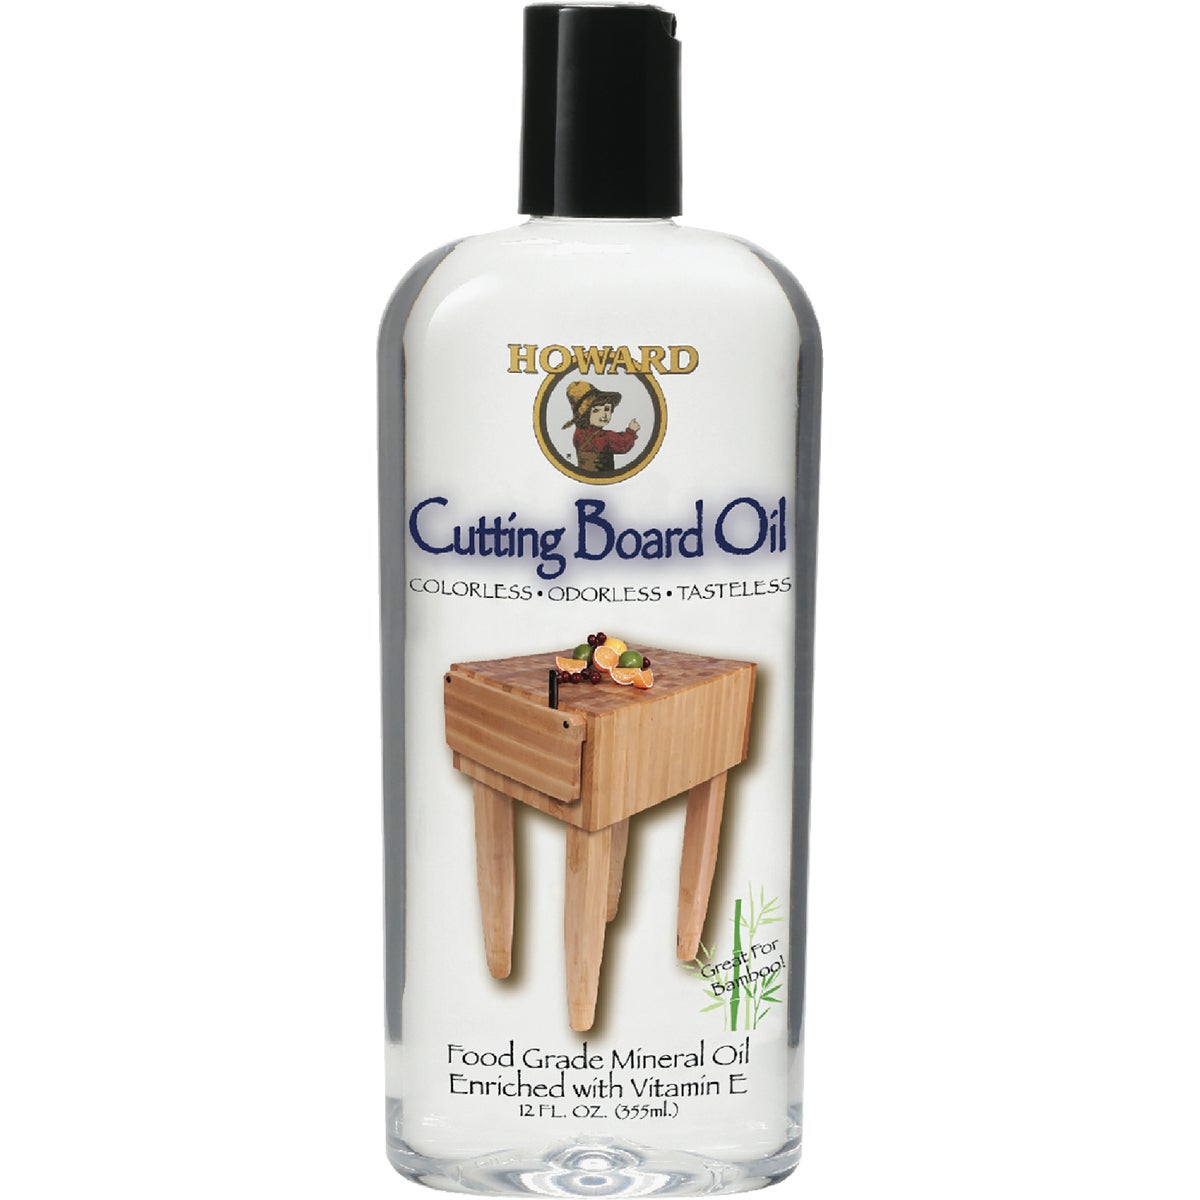 Item 620493, Howard Cutting Board Oil is made with clear, odorless, pure food-grade 